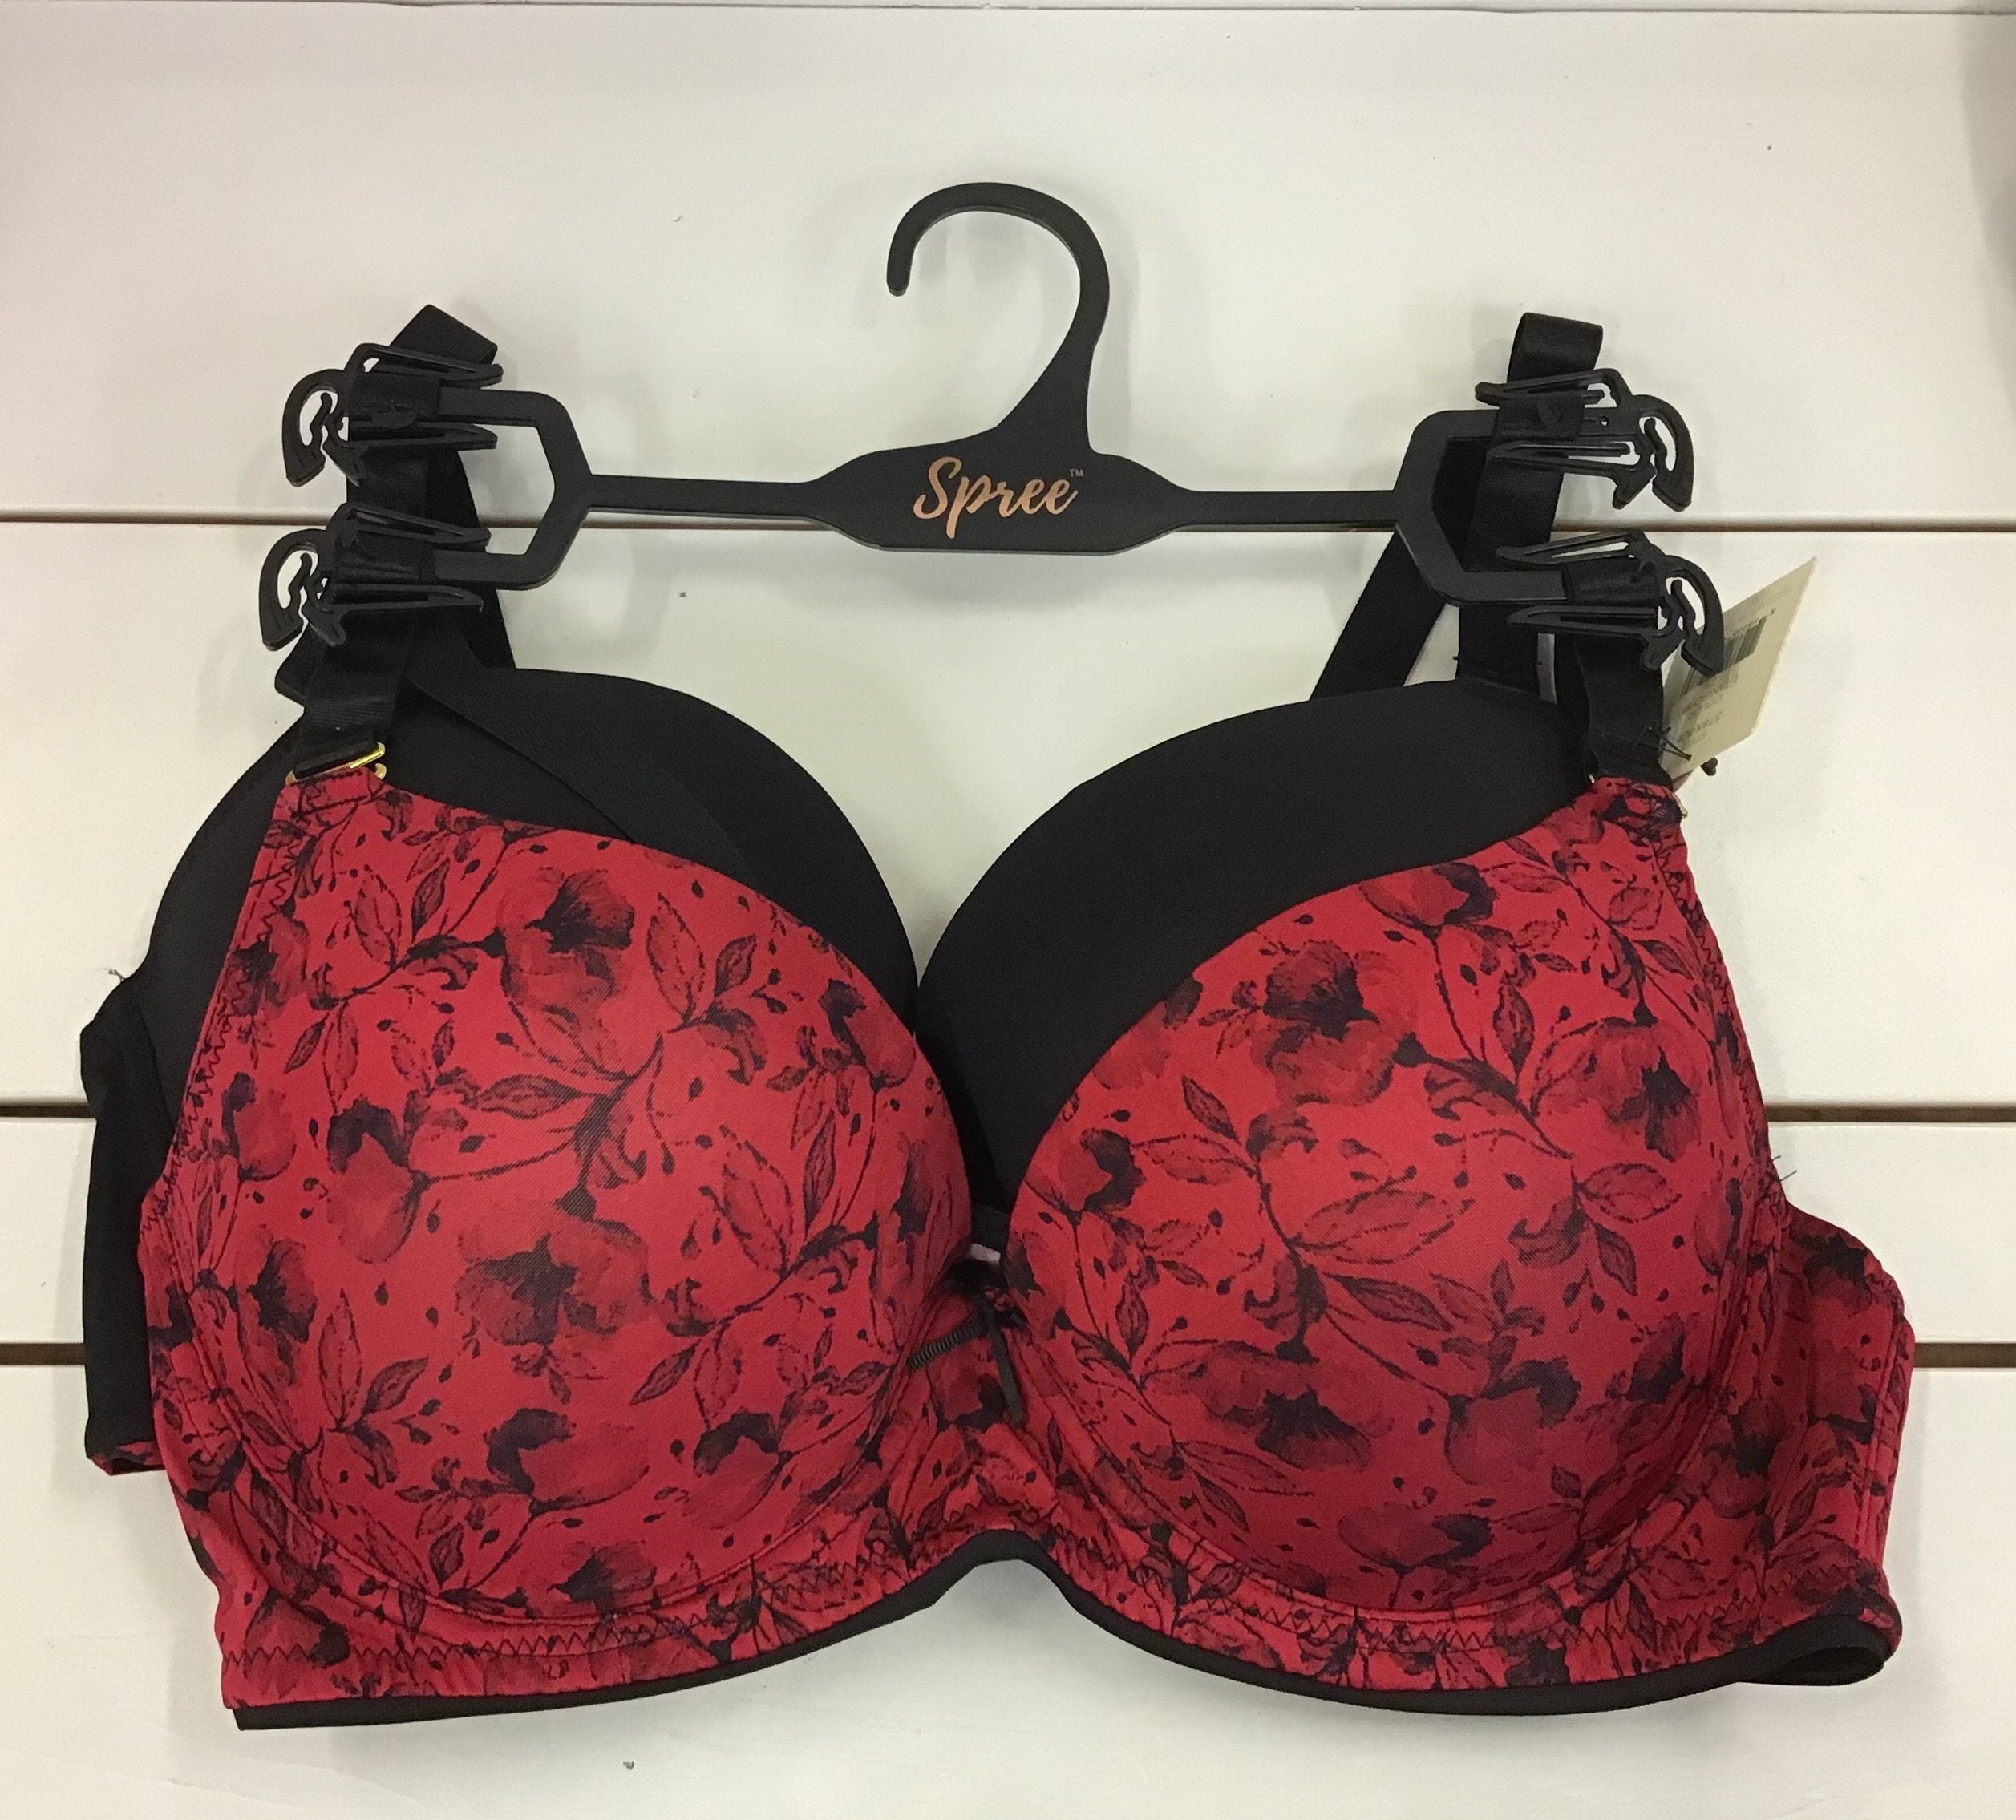 Buy Women's T-Shirt Cotton Hosiery Black & Red Bra (Pack of 2) - 30C, May  Be Solids, Prints Or A Combination Assorted at